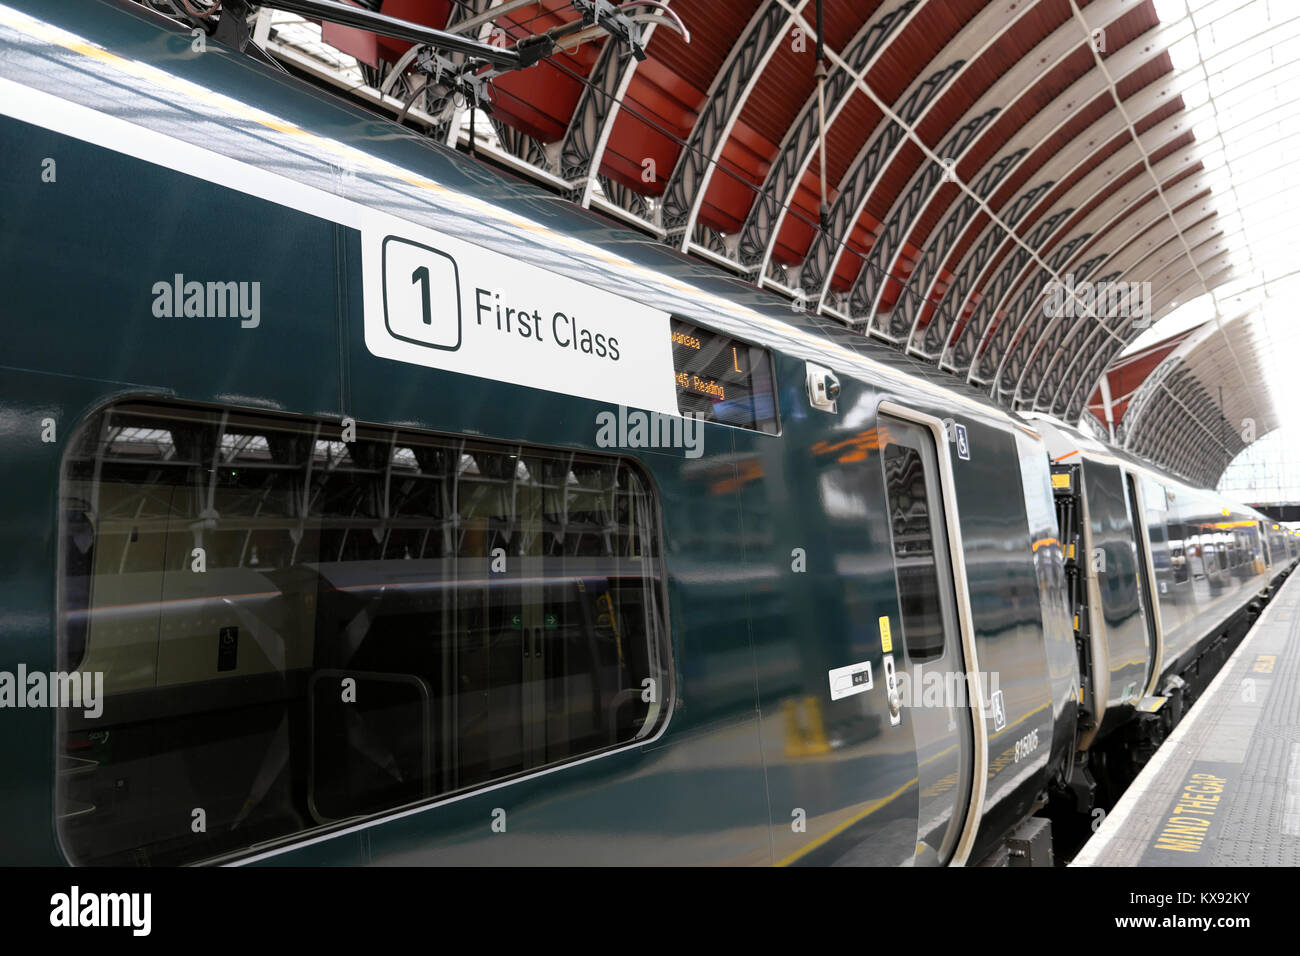 GWR Class 800 train First Class sign on carriage at Paddington Station platform in London England UK  October 2017   KATHY DEWITT Stock Photo